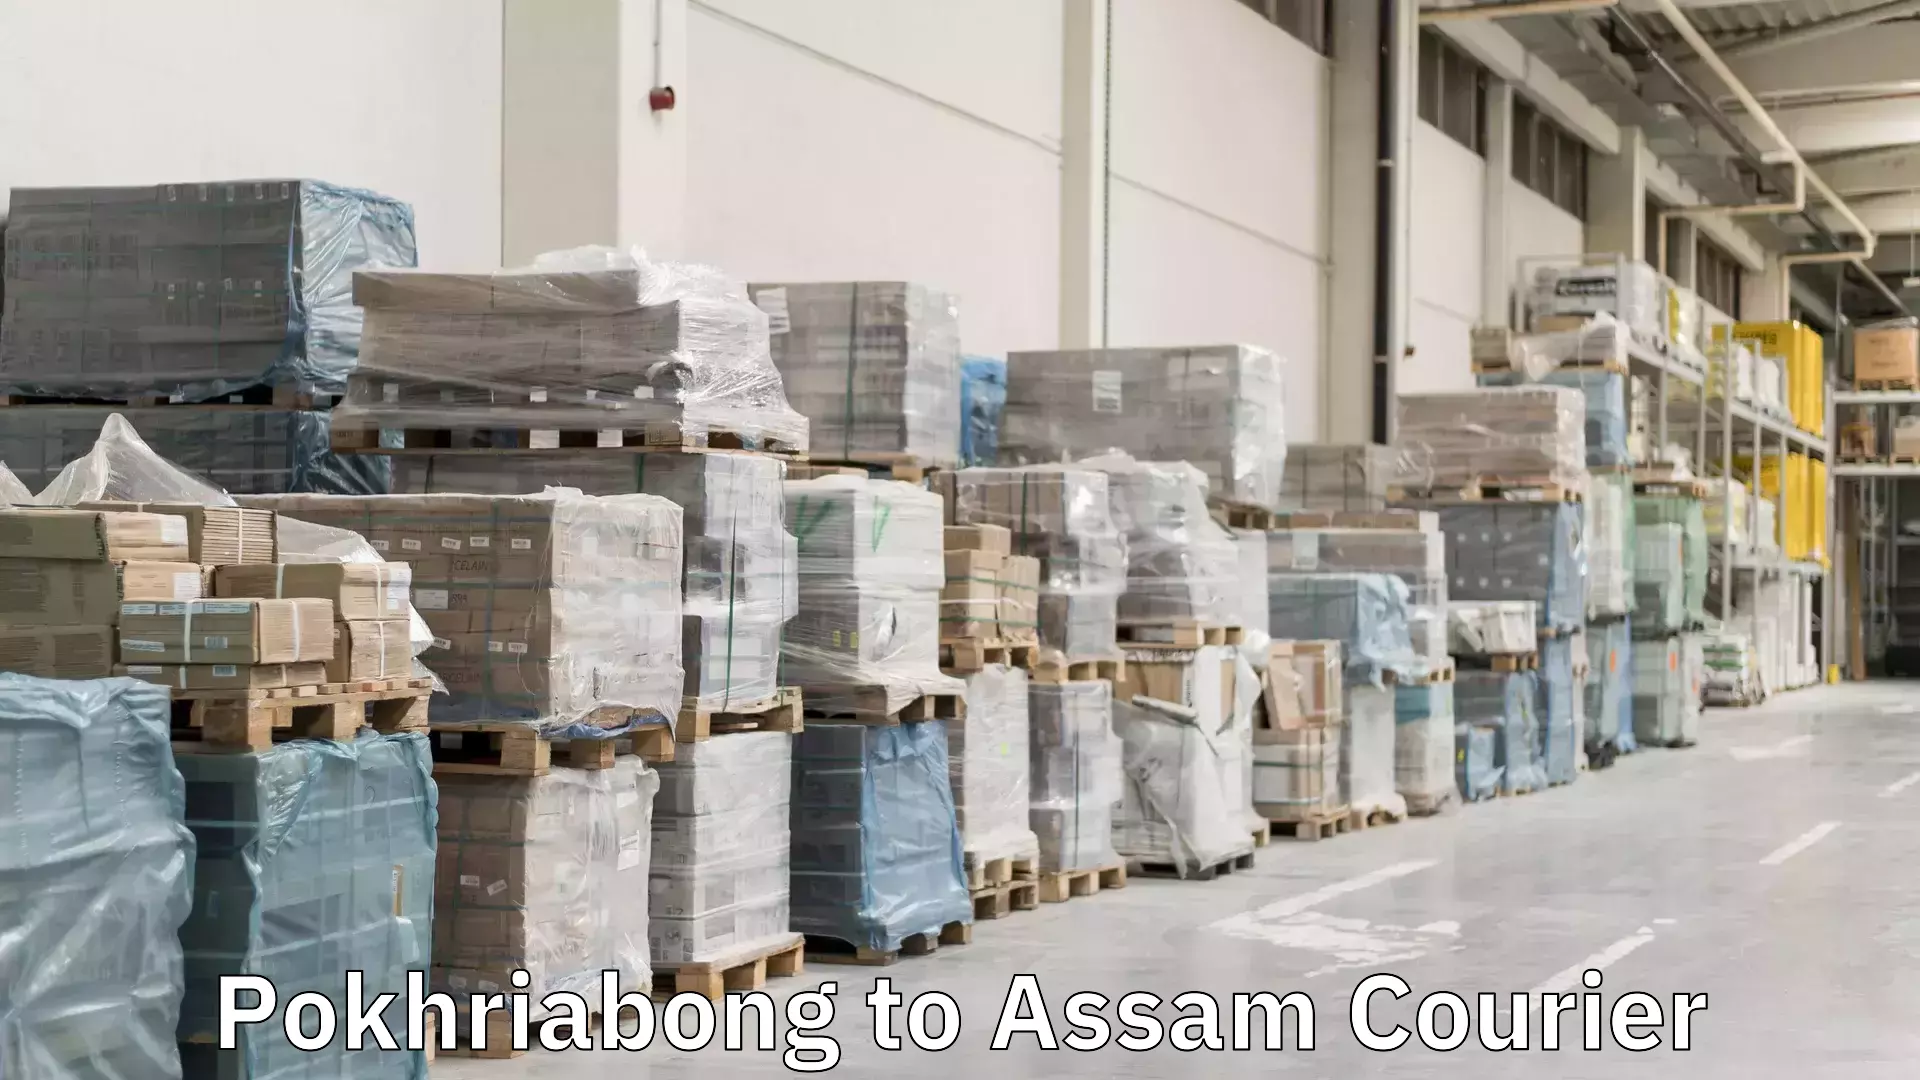 Same-day delivery options in Pokhriabong to Assam